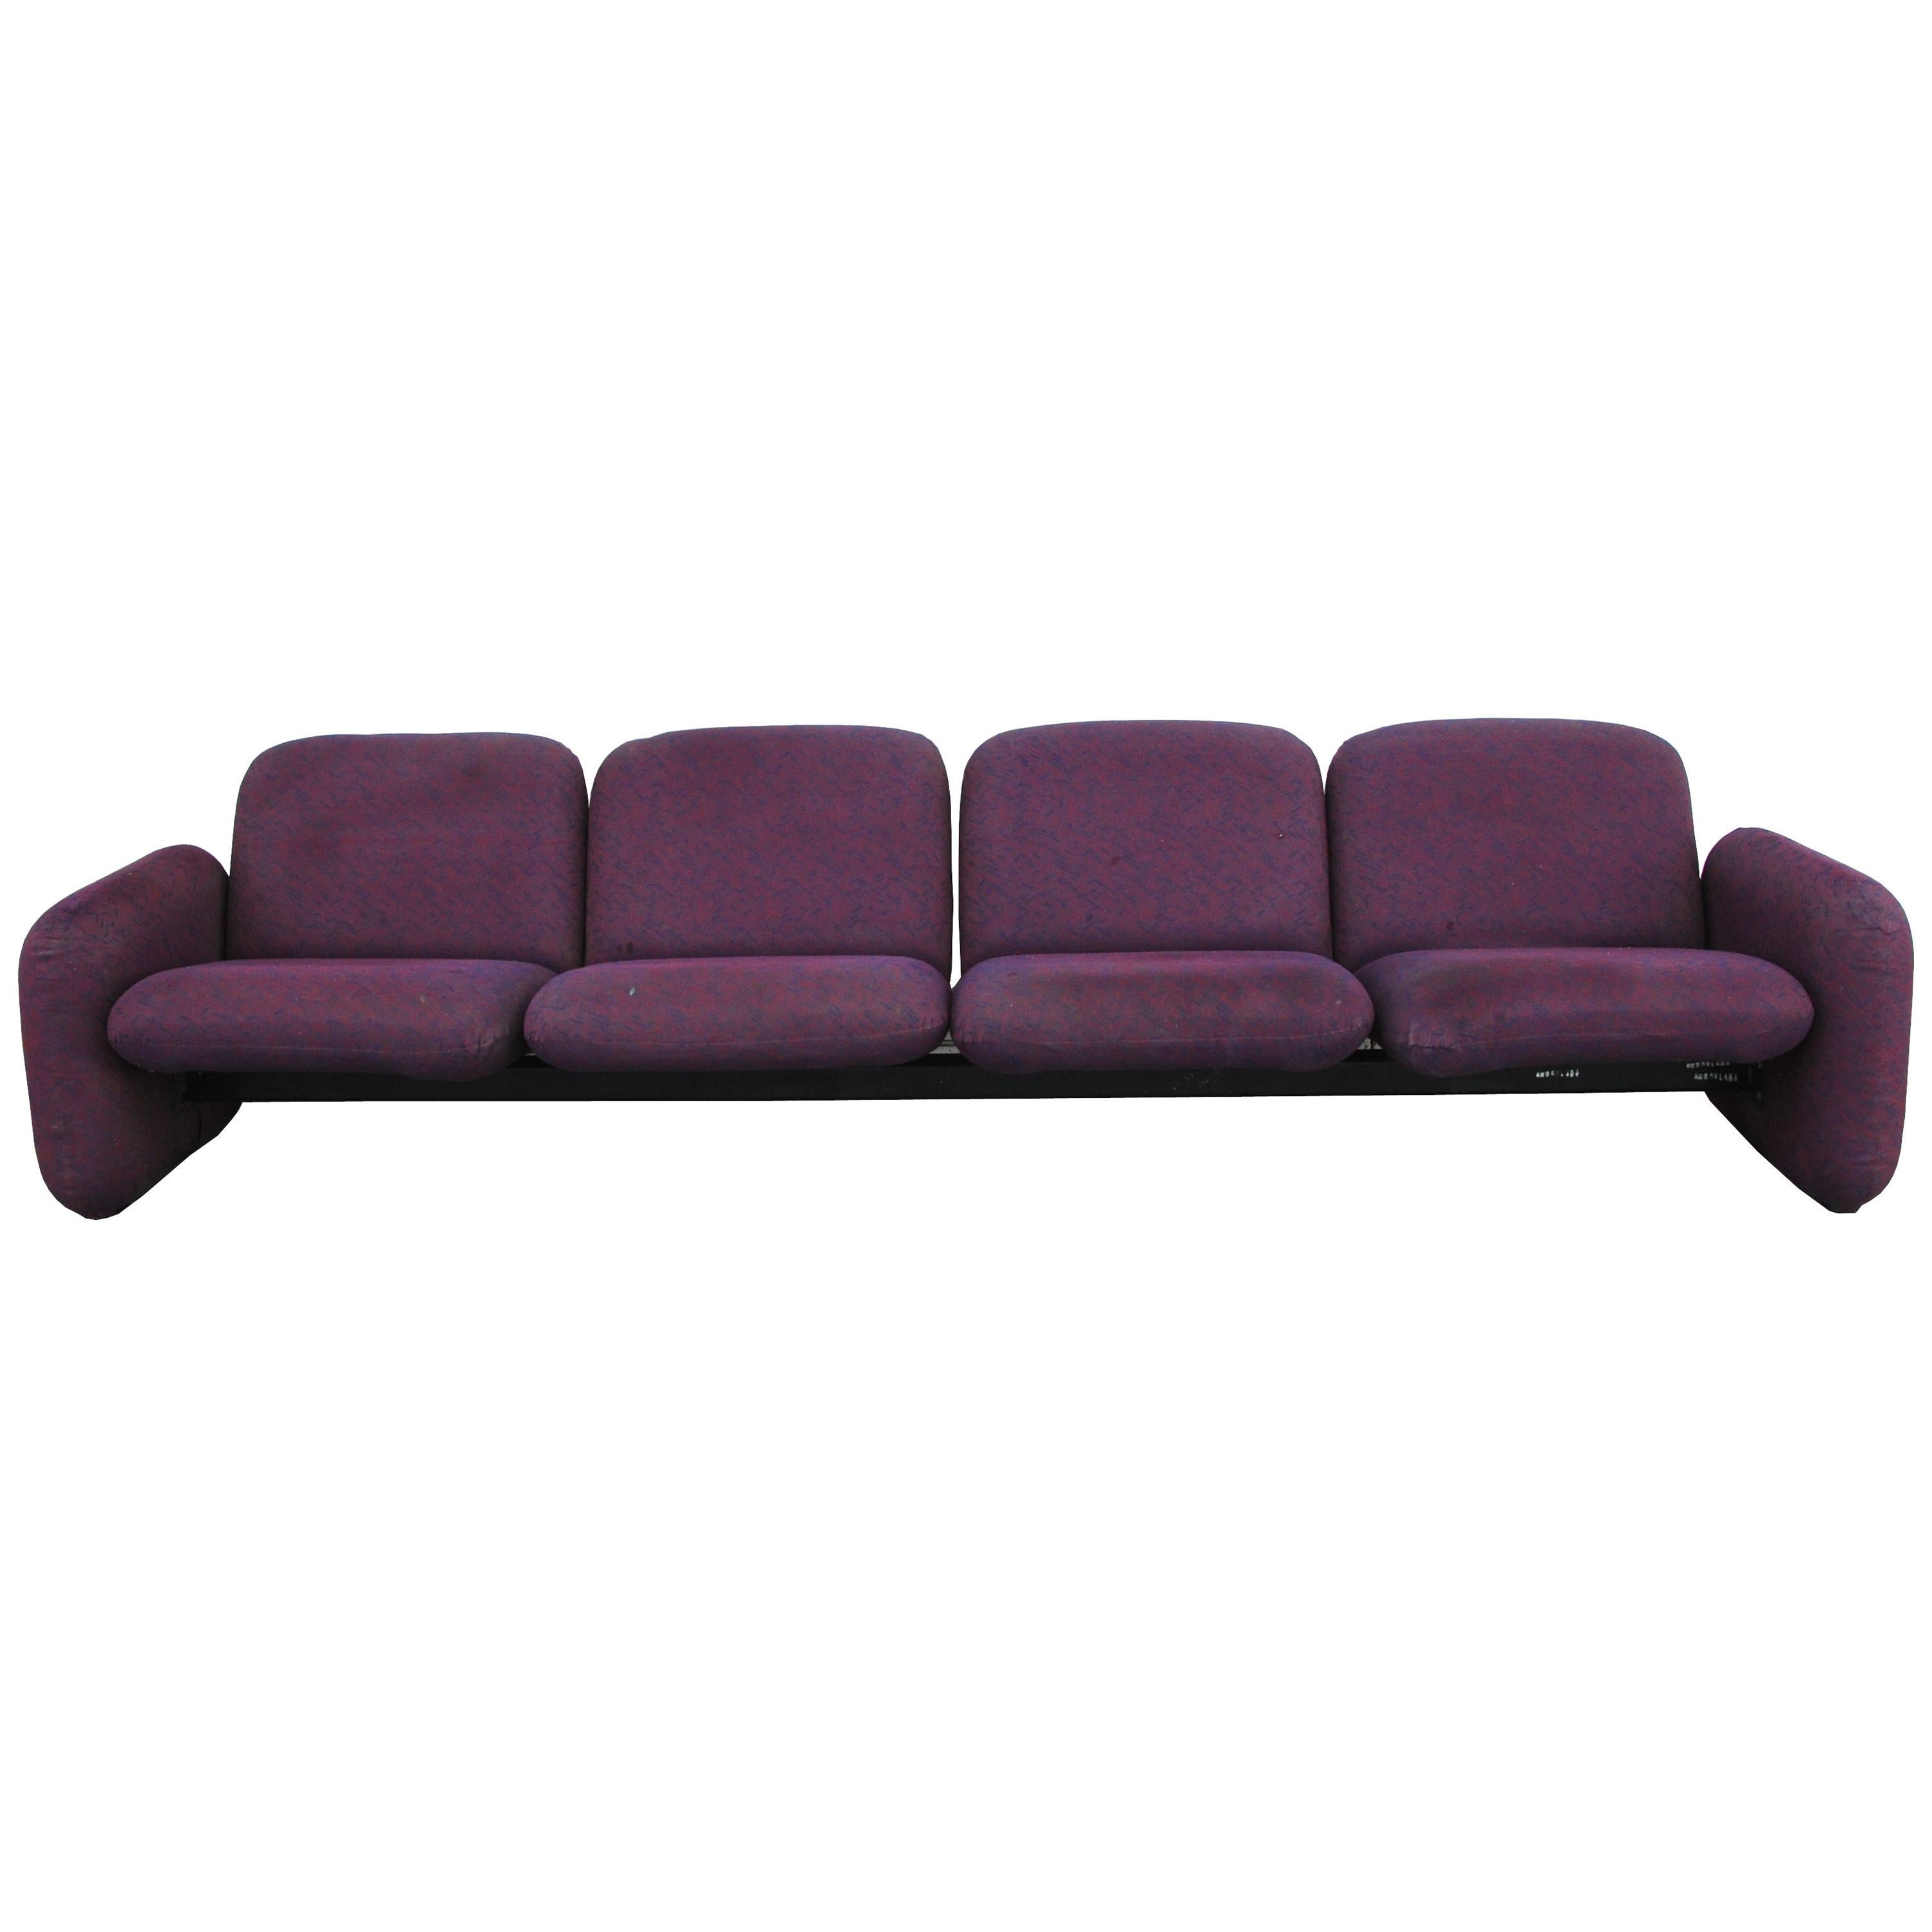 Chiclet Modular 4-Seat Sofa by Ray Wilkes For Sale